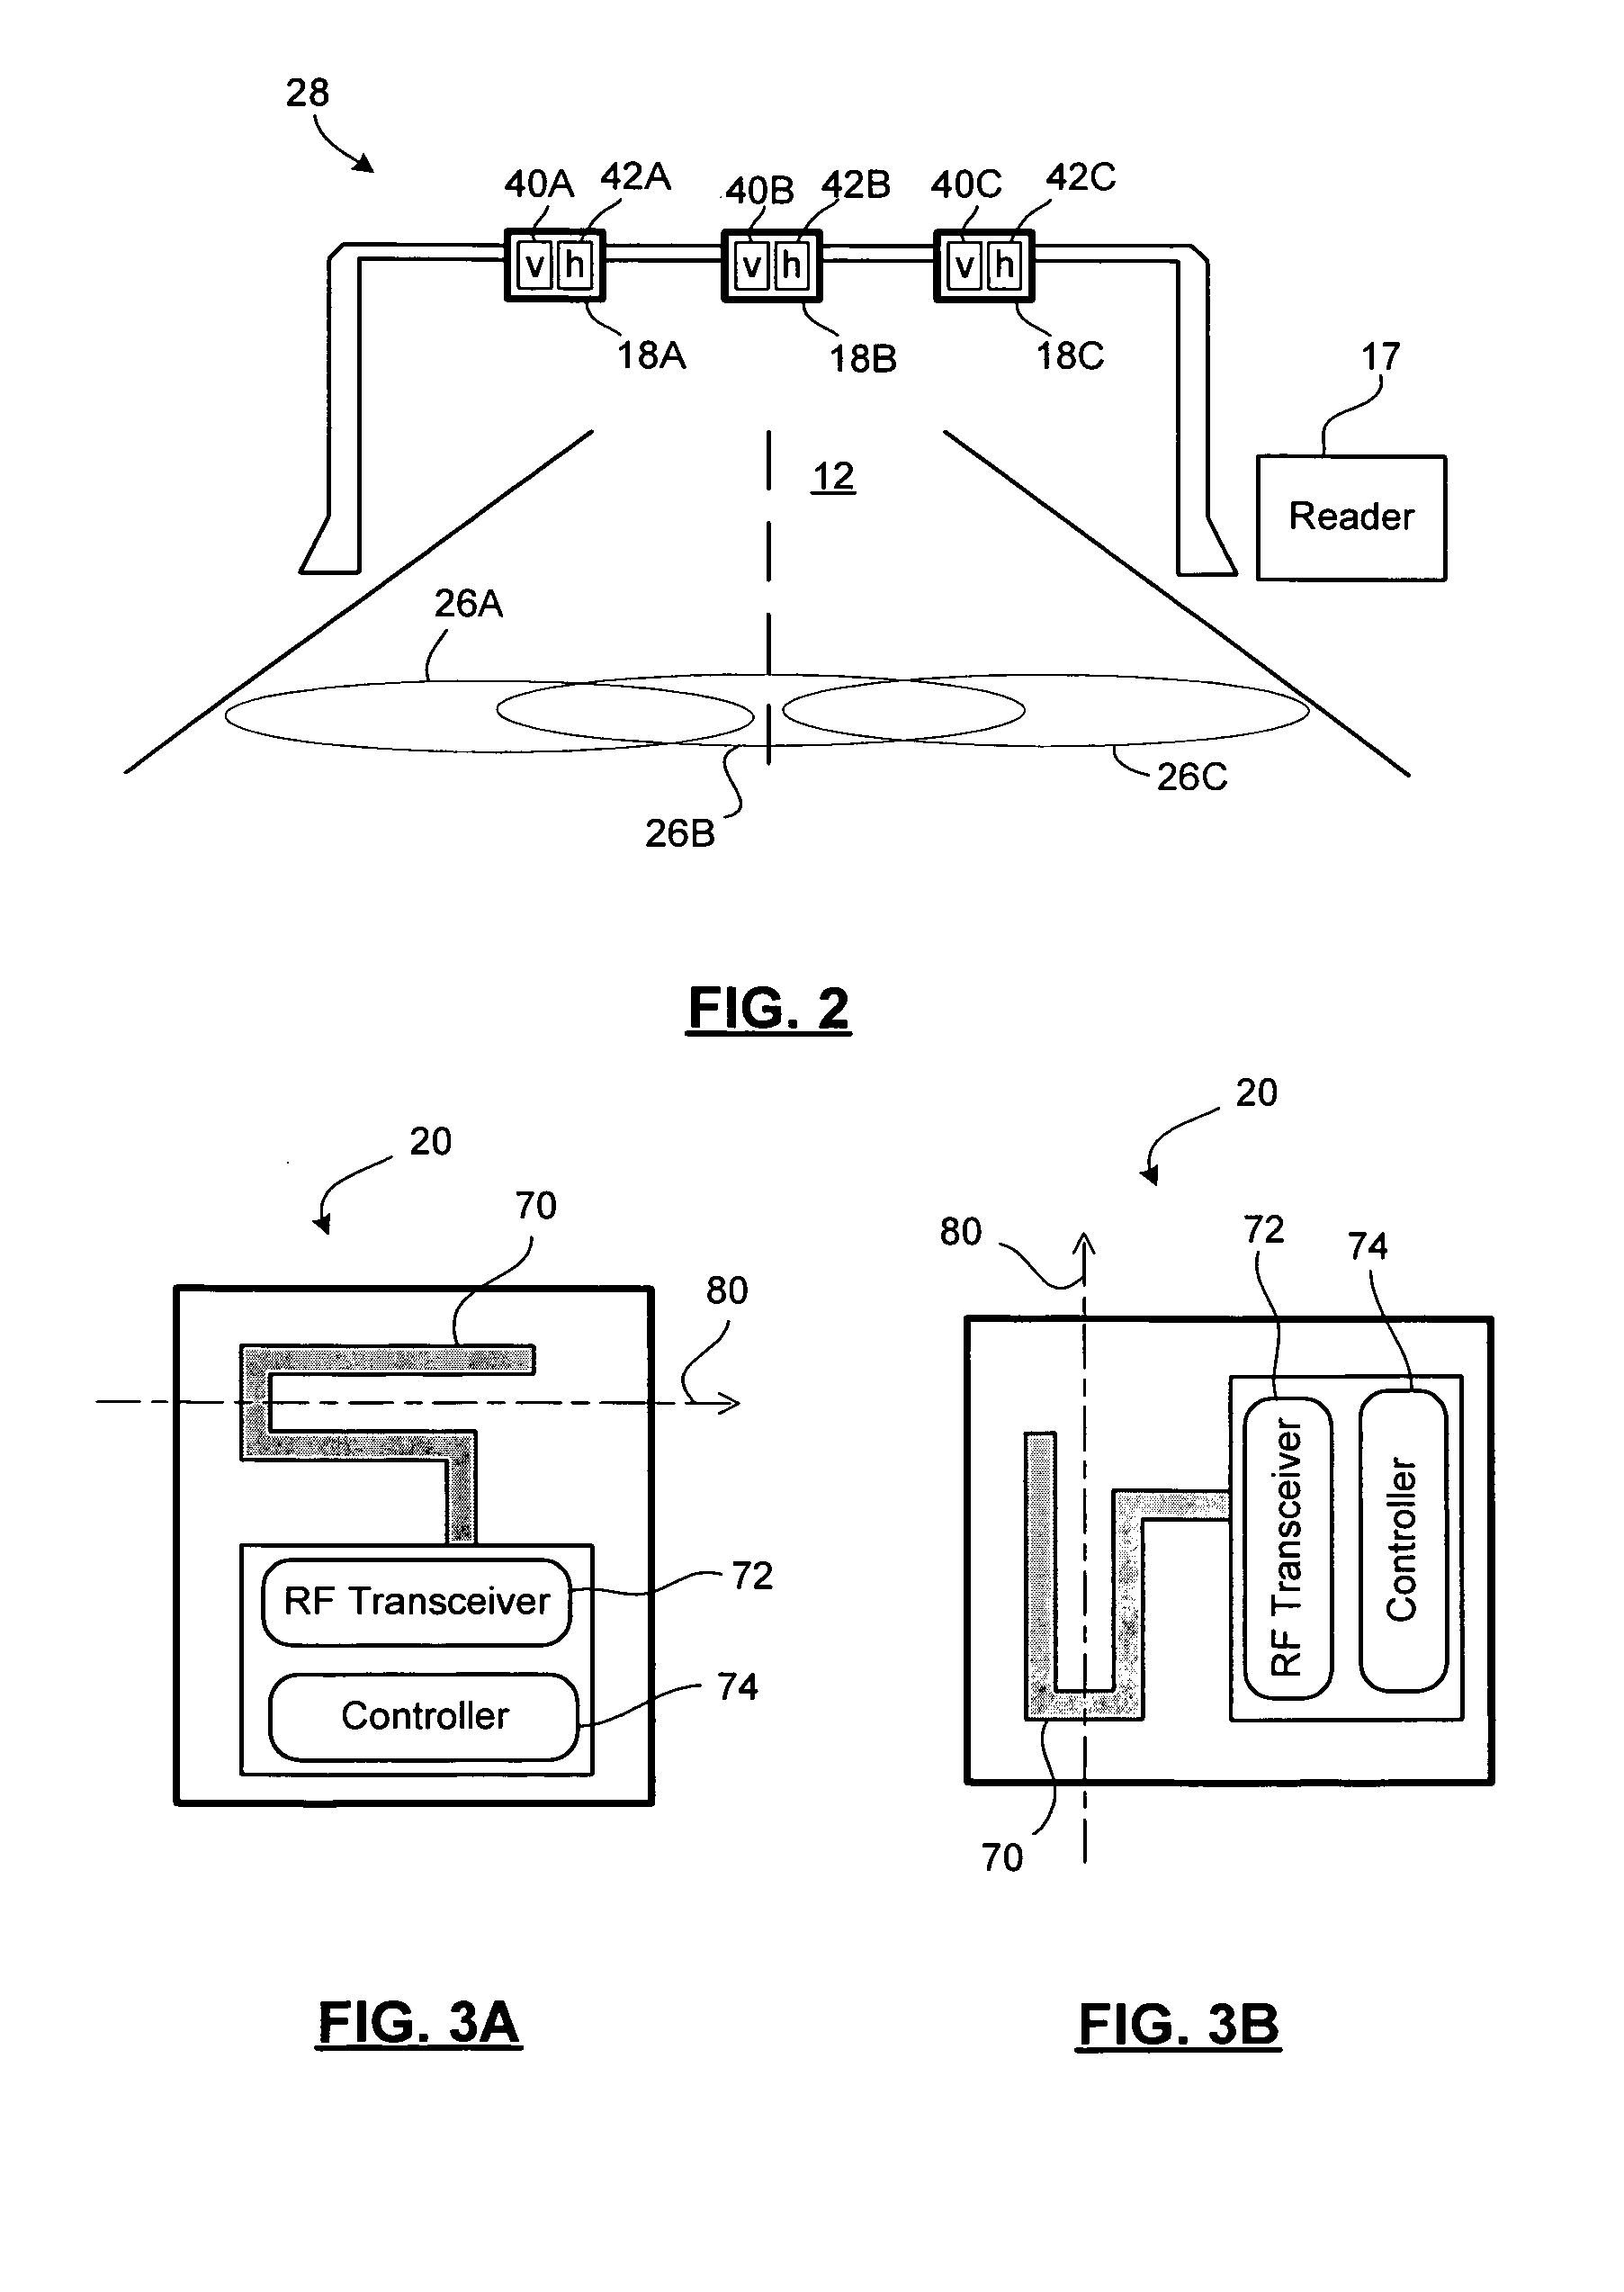 Method of enabling two-state operation of electronic toll collection system